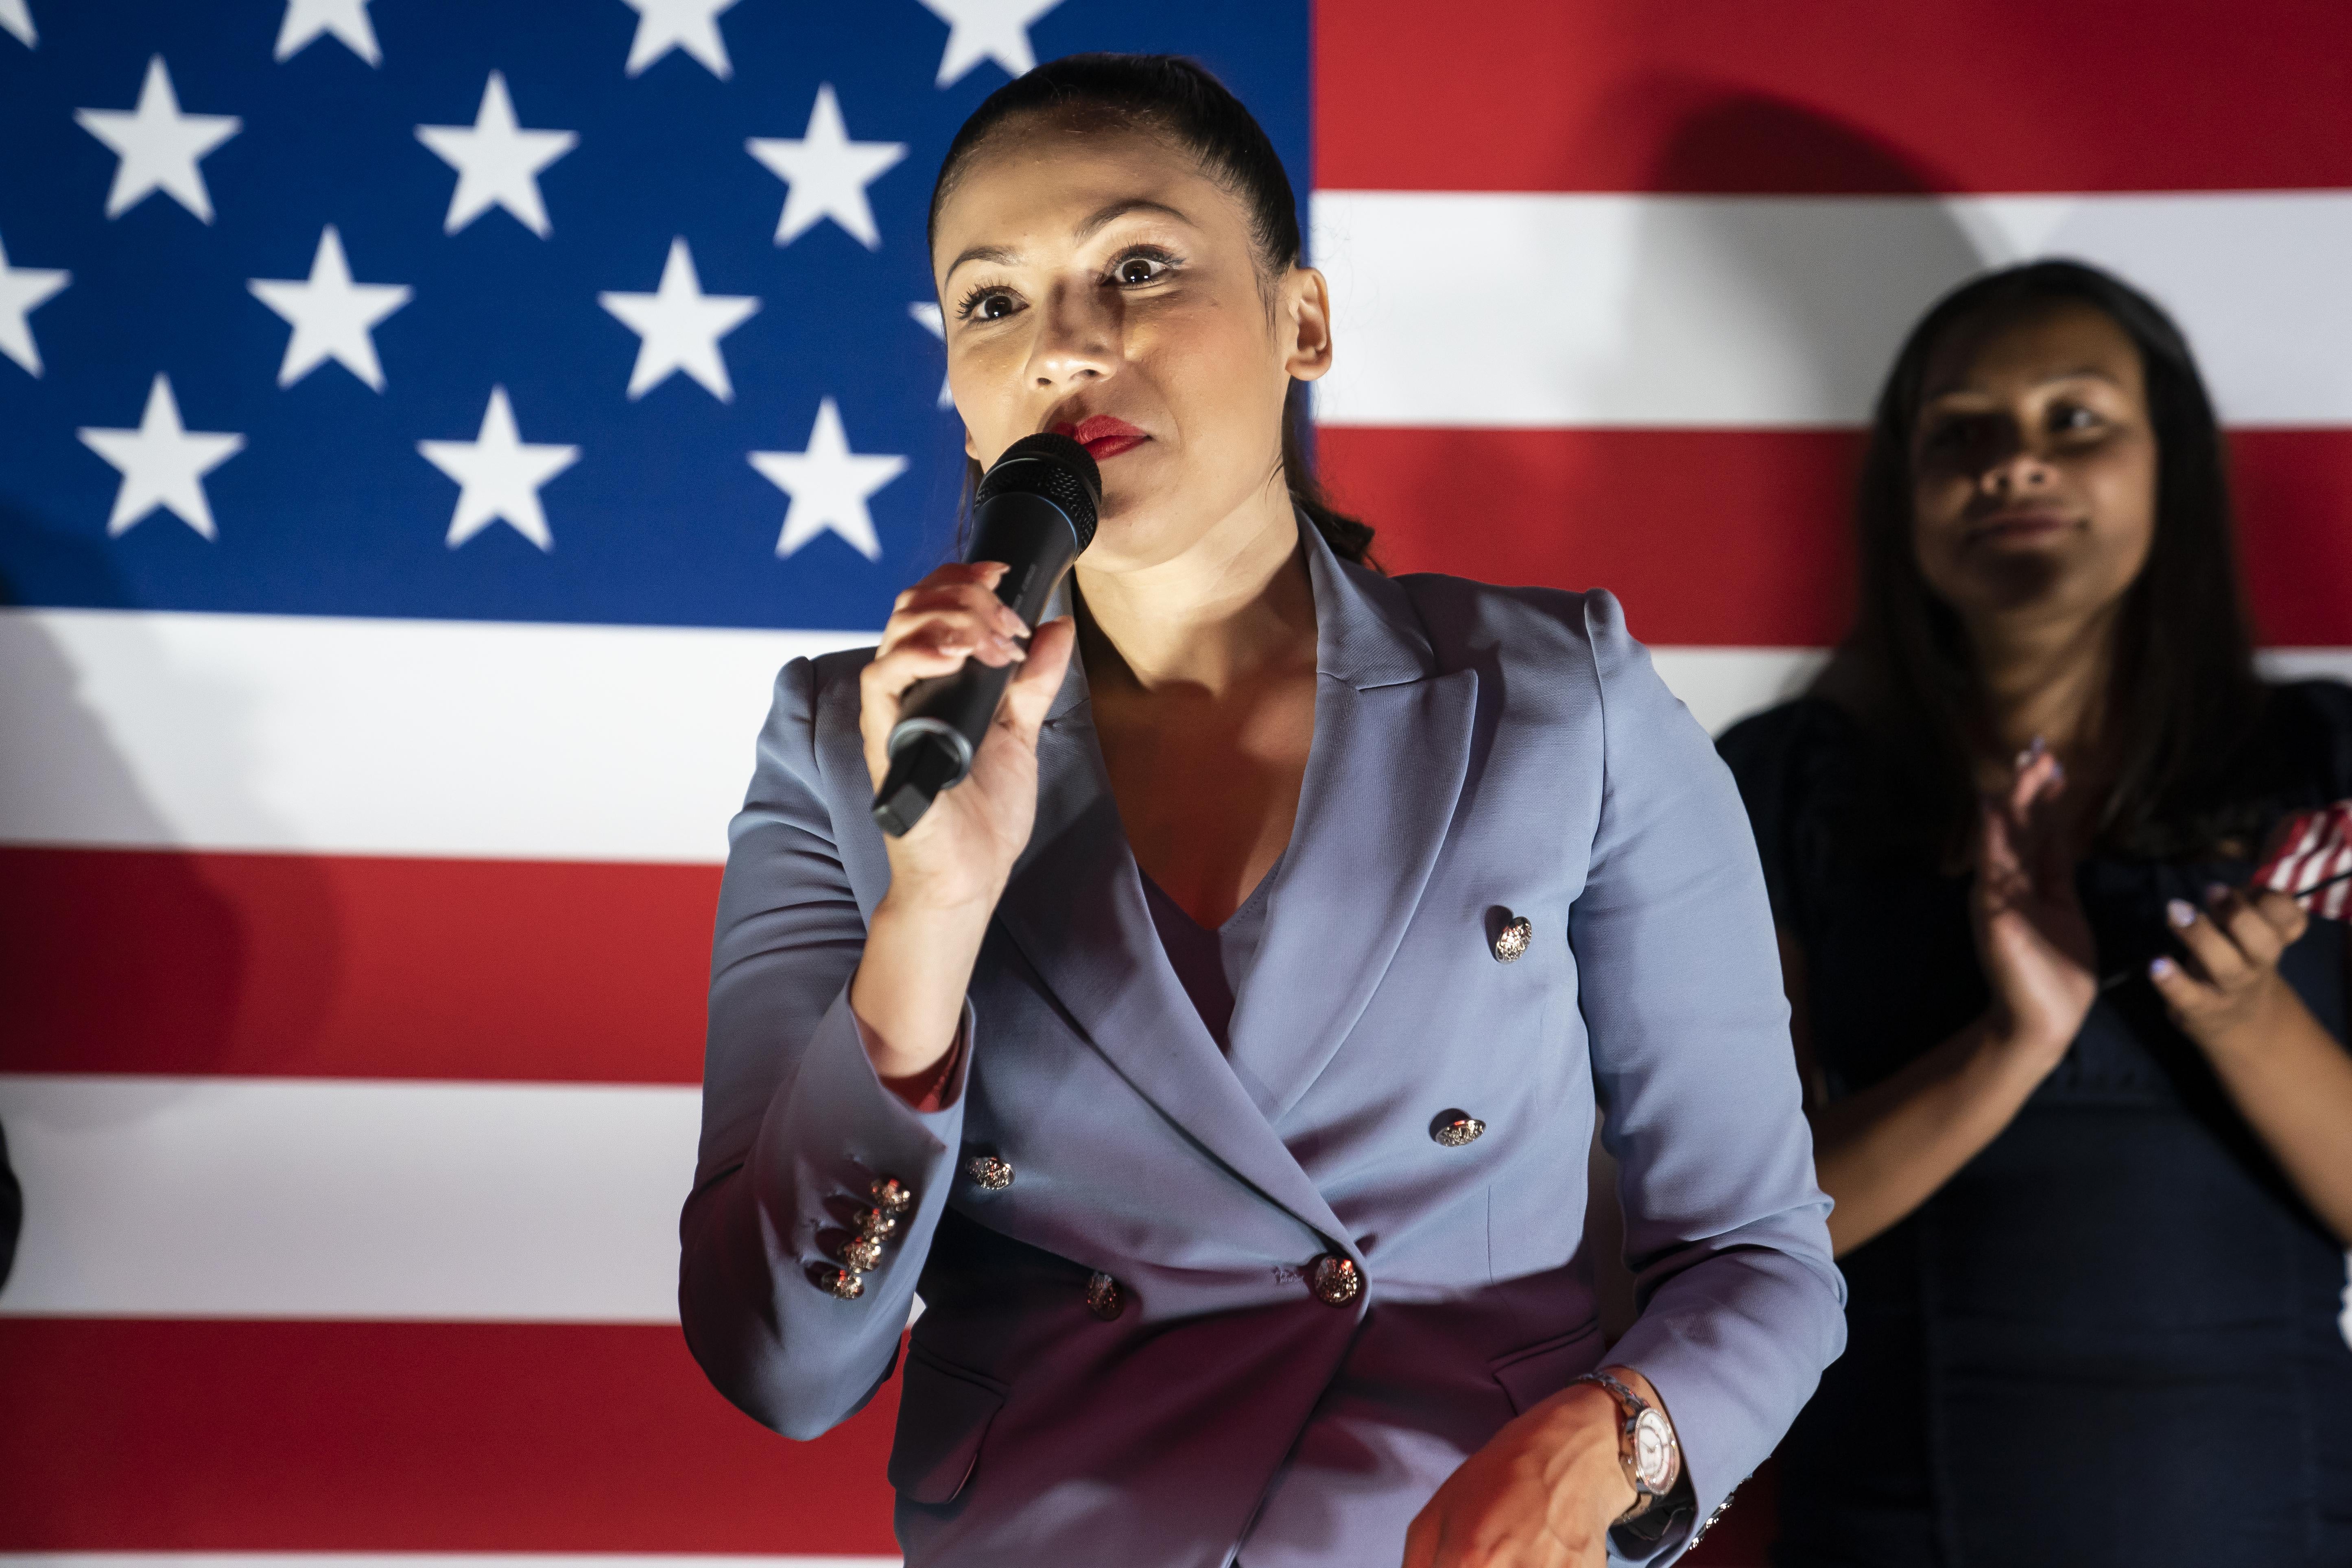 Vega holds and speaks into a mic as another woman claps in front of an American flag behind her